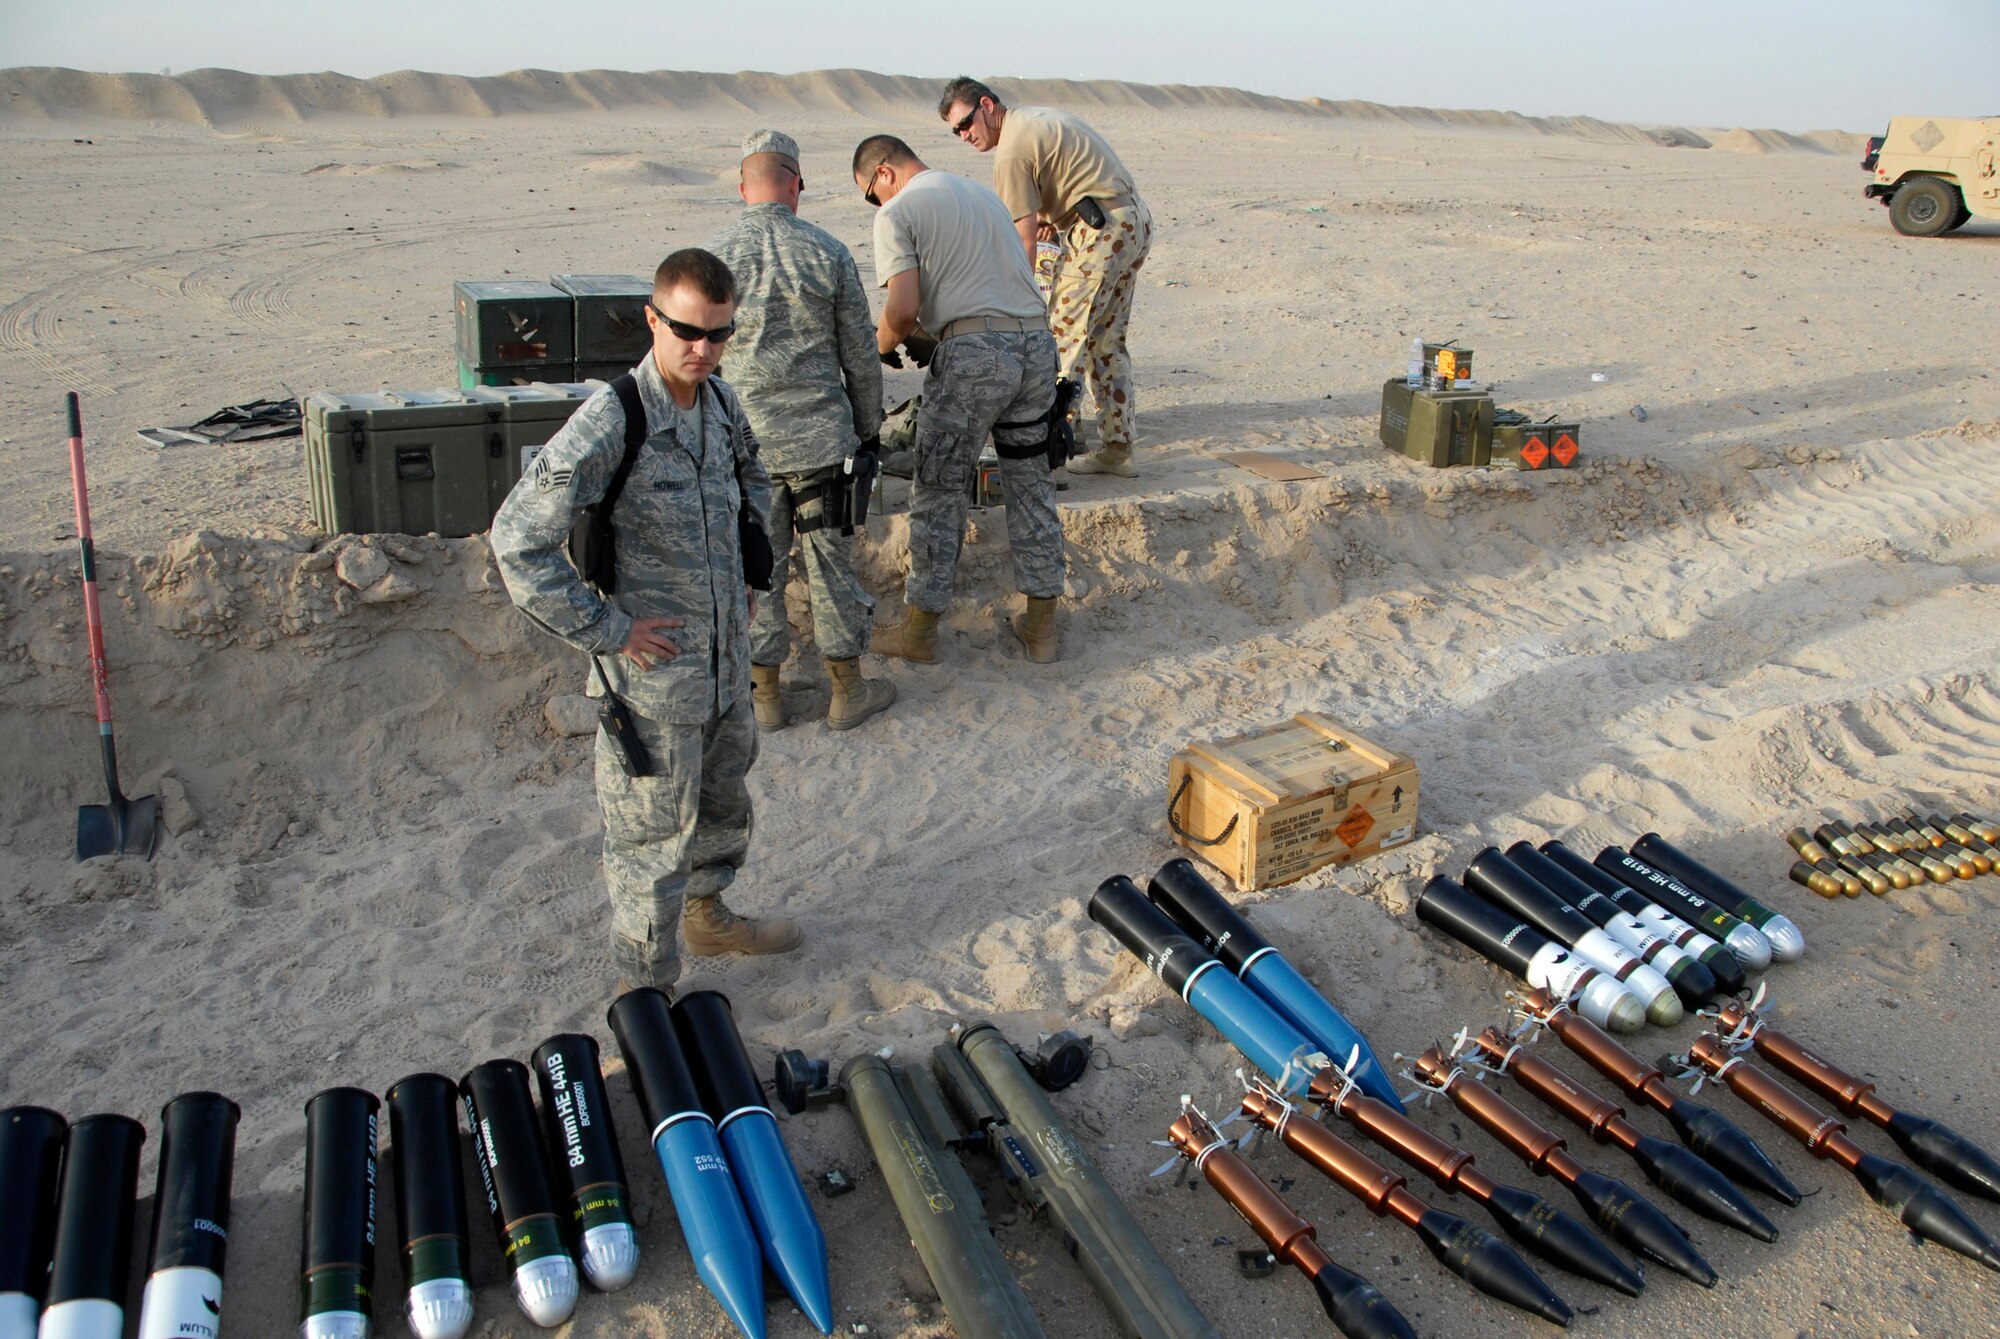 Senior Airman Charles Howell (front center) looks over the munitions that are about to be destroyed while other Airmen and Australian army ammunition technicians prepare light anti-armor weapon rockets for disposal prior to a controlled detonation June 20 at an explosive ordnance disposal range in Southwest Asia. The joint detonation also provided an opportunity for the U.S. and coalition forces to enhance their relations while learning some of the slight differences in operating procedures. Airman Howell is assigned to the 386th Expeditionary Civil Engineer Squadron Explosive Ordnance Disposal Flight. (U.S. Air Force photo/Staff Sgt. Patrick Dixon) 
